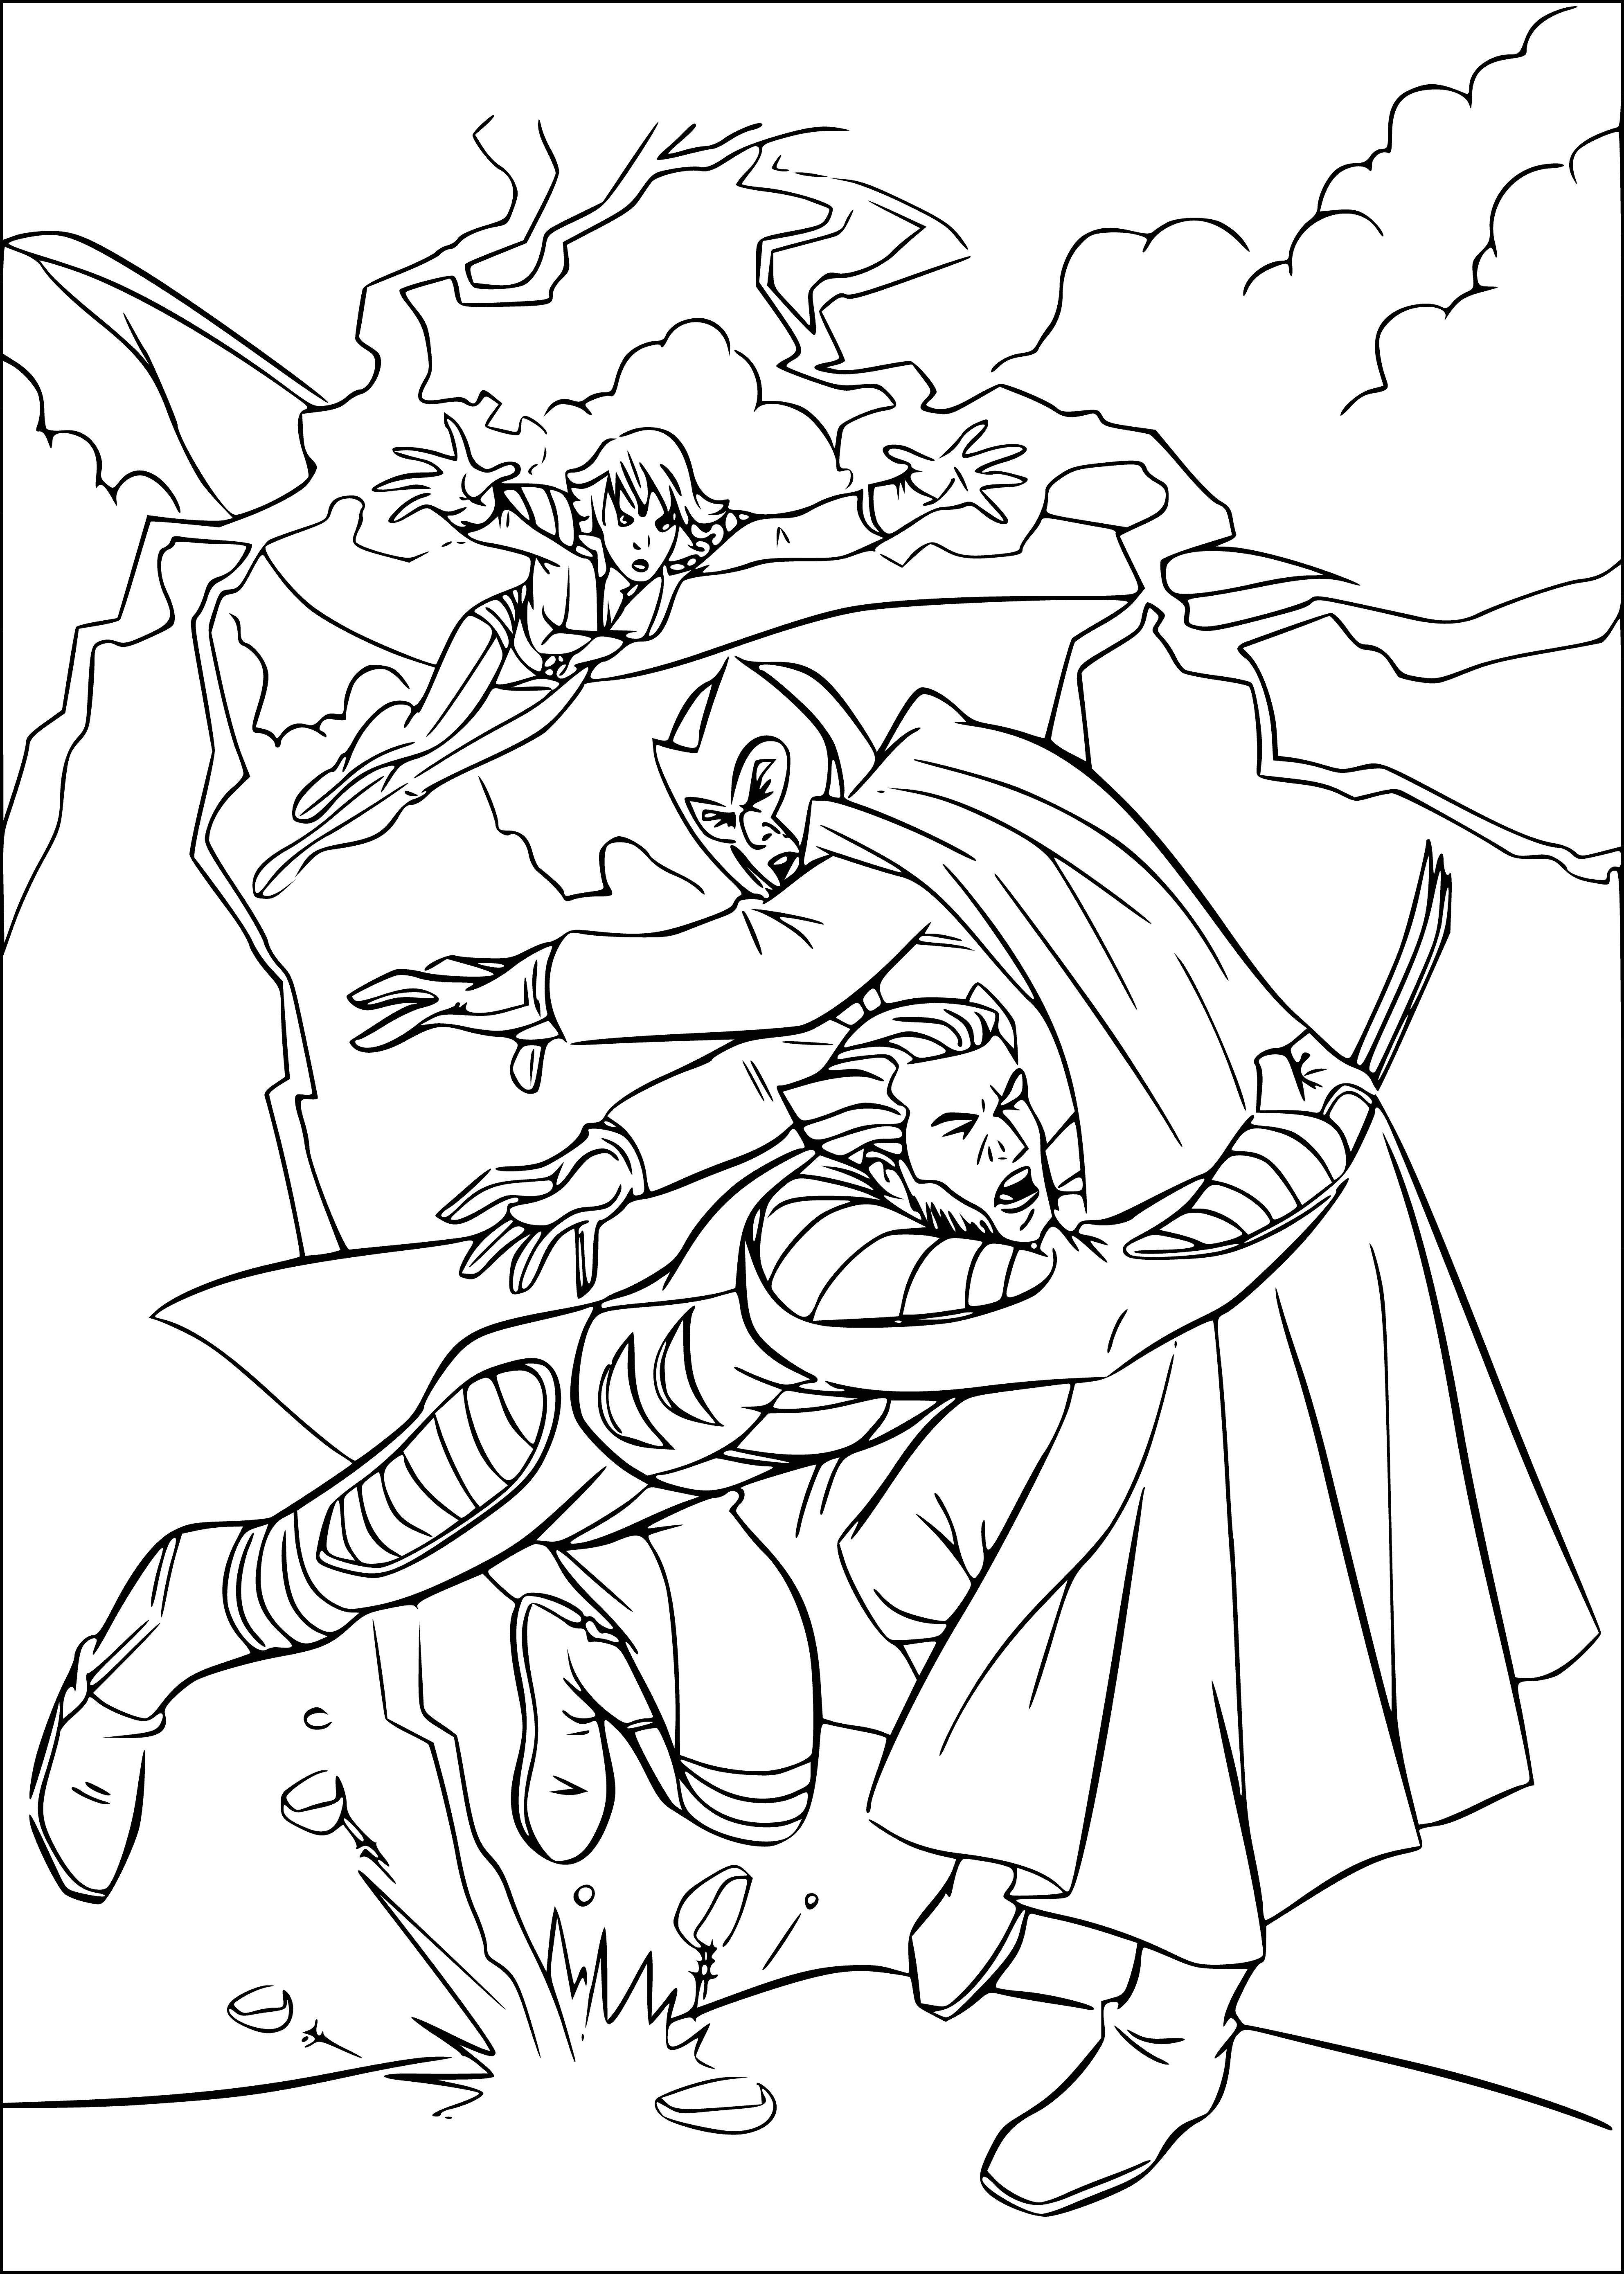 Rosomaha and Magneto coloring page